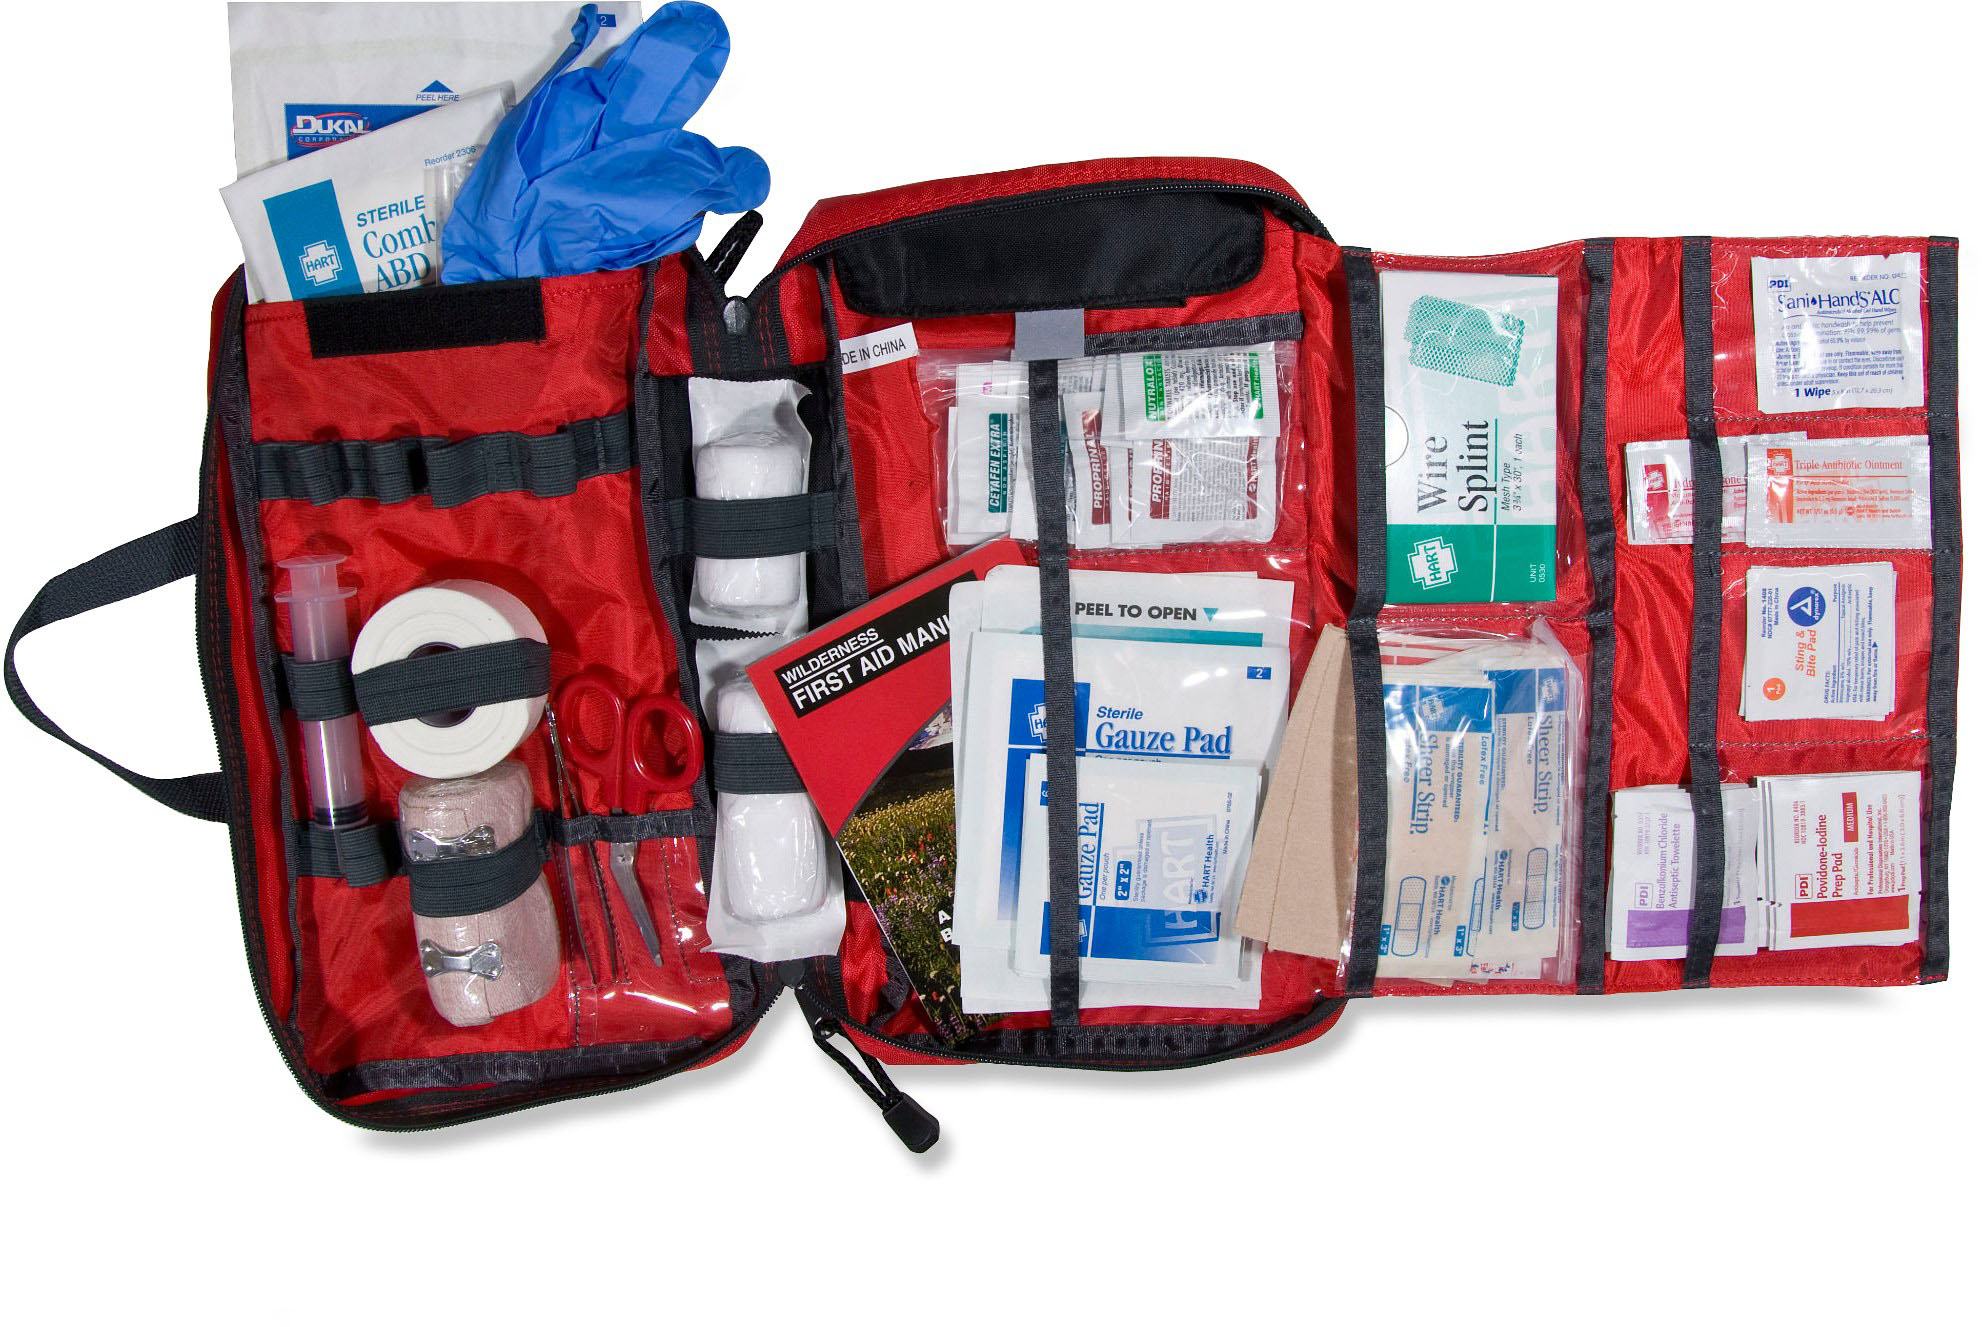  Protect Life First Aid Kit for Home/Business, HSA/FSA Eligible Emergency  Kit, Hiking First aid kit Camping, Travel First Aid Kit for Car